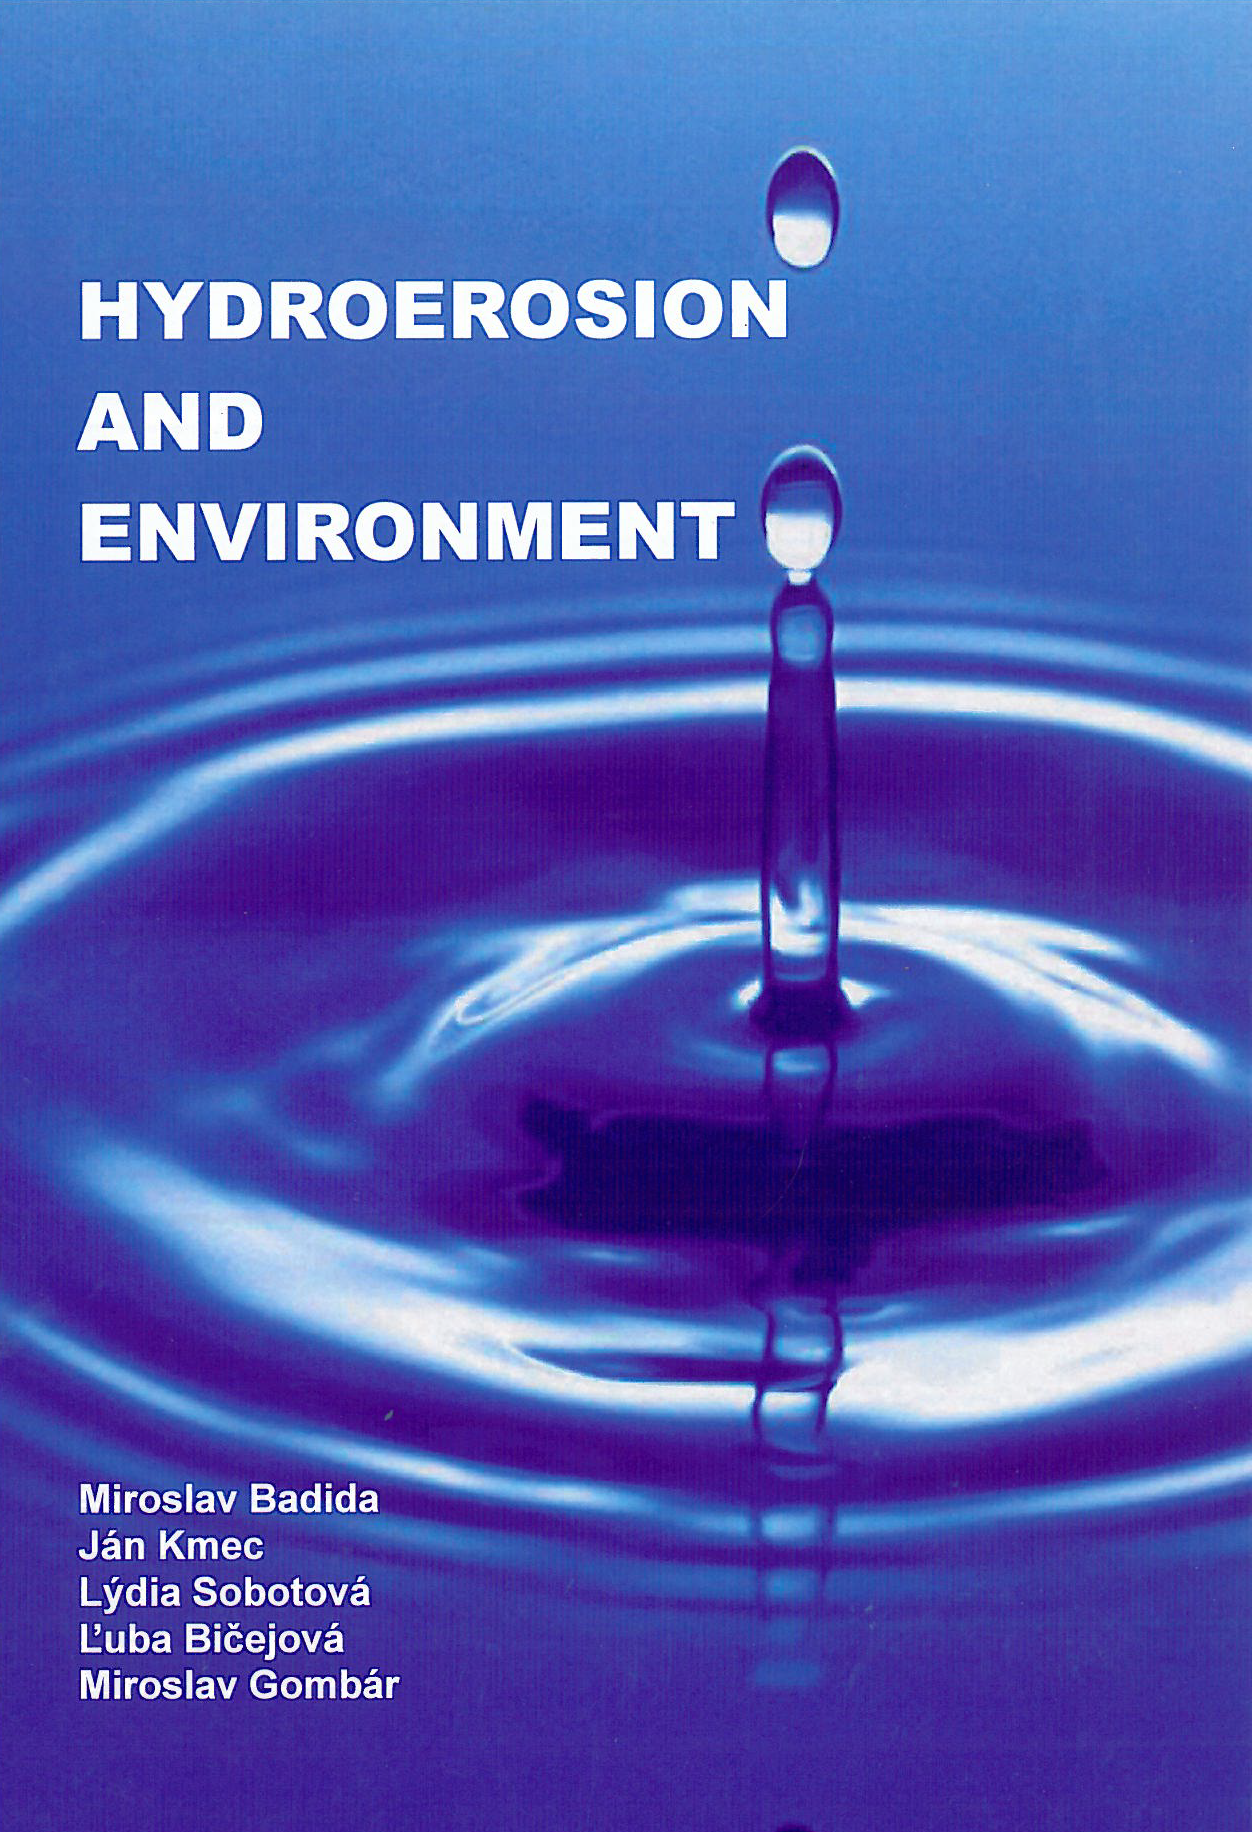 HYDROEROSION AND ENVIRONMENT